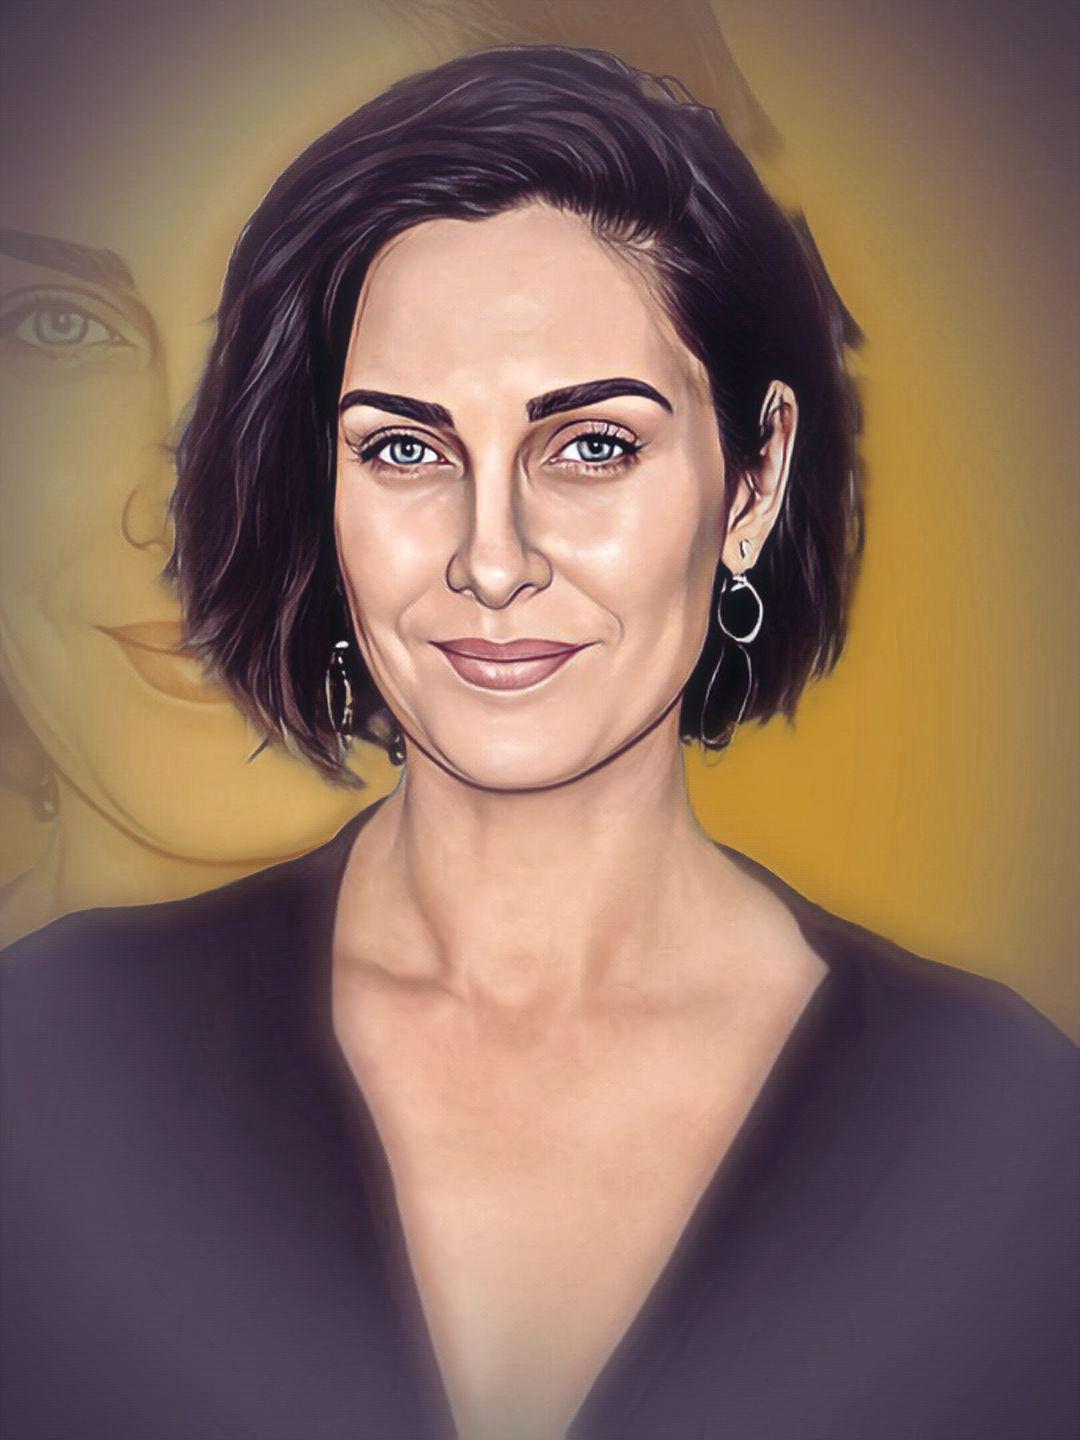 Anne Hathaway Porn Lesbian - Carrie-Anne Moss - Celeb ART - Beautiful Artworks of Celebrities,  Footballers, Politicians and Famous People in World | OpenSea